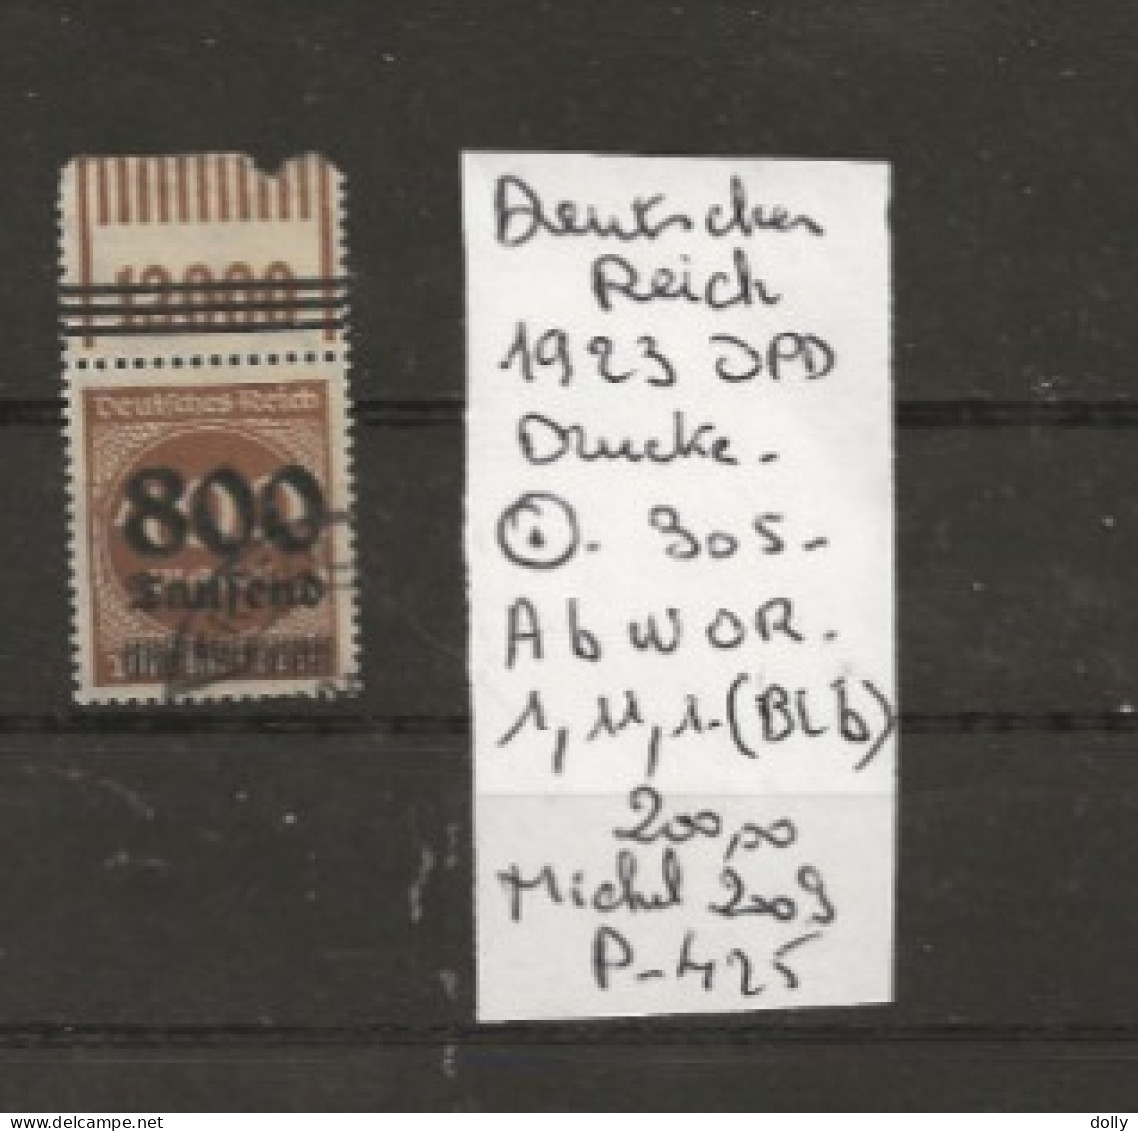 TIMBRE D ALLEMAGNE DEUTSCHES REICH 1923 Nr 305 OBLITERE OPD  A B W OR 1,11,1 COTE 200.00 € - 1922-1923 Emissions Locales